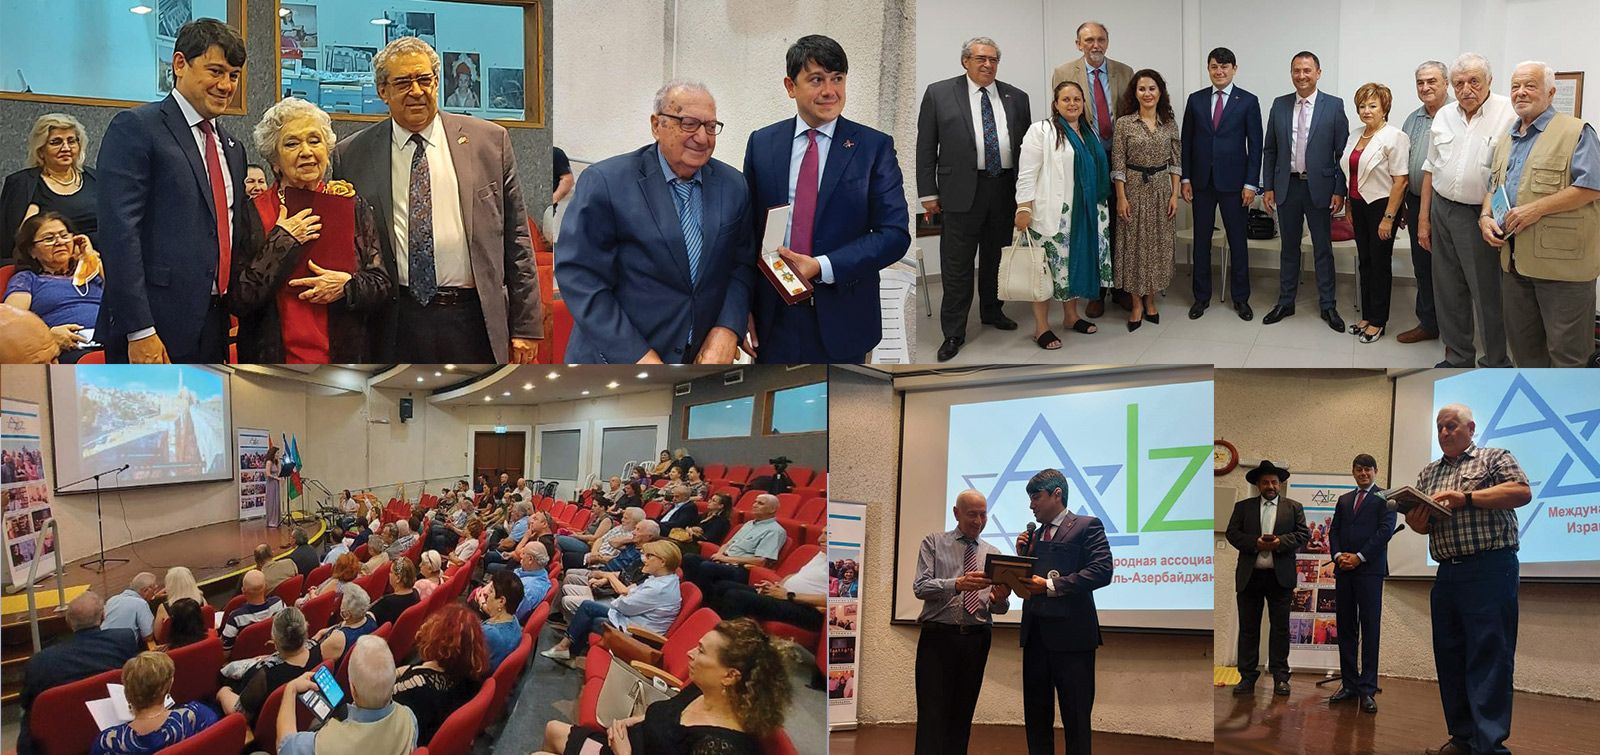 The chairman of the State Committee took part in various events in Israel